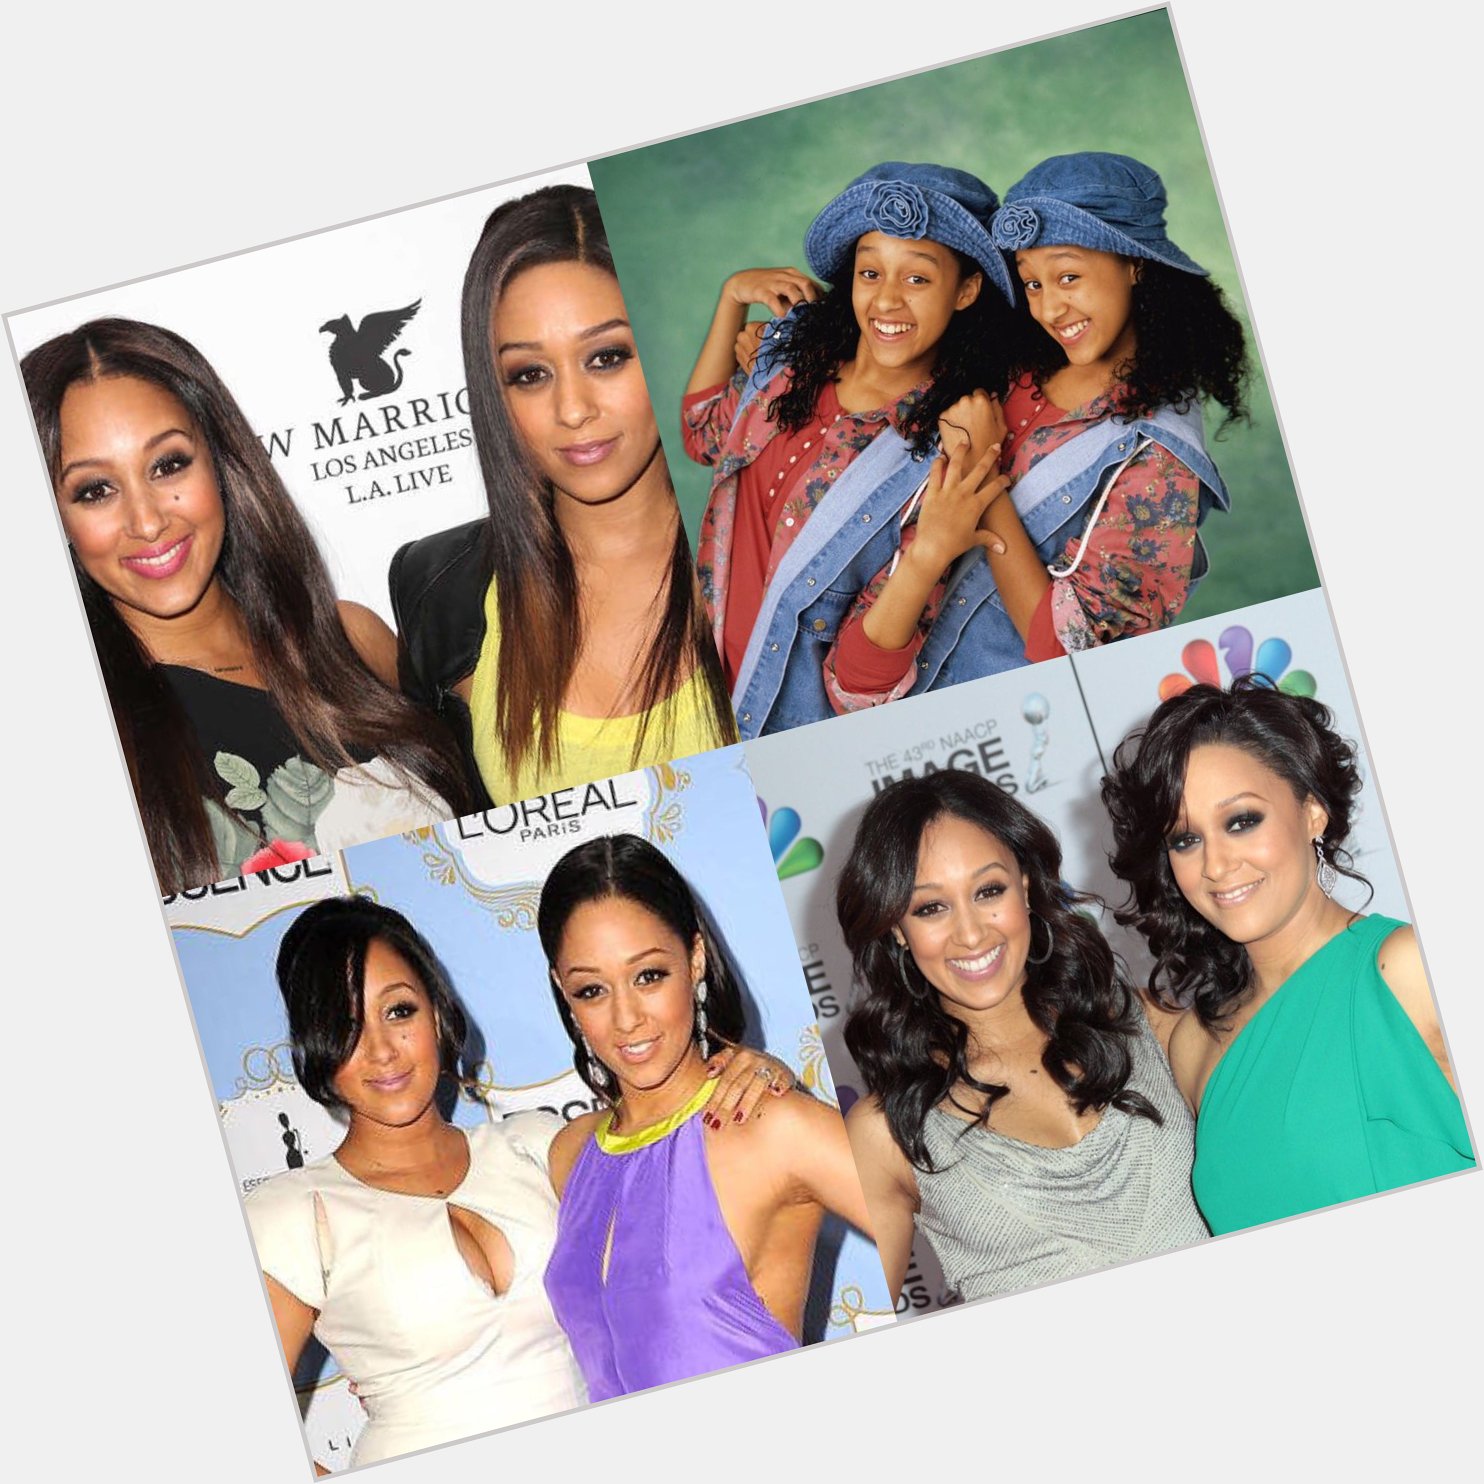 Happy 39 birthday to Tia and Tamera Mowry . Hope that they both have a wonderful birthday.     